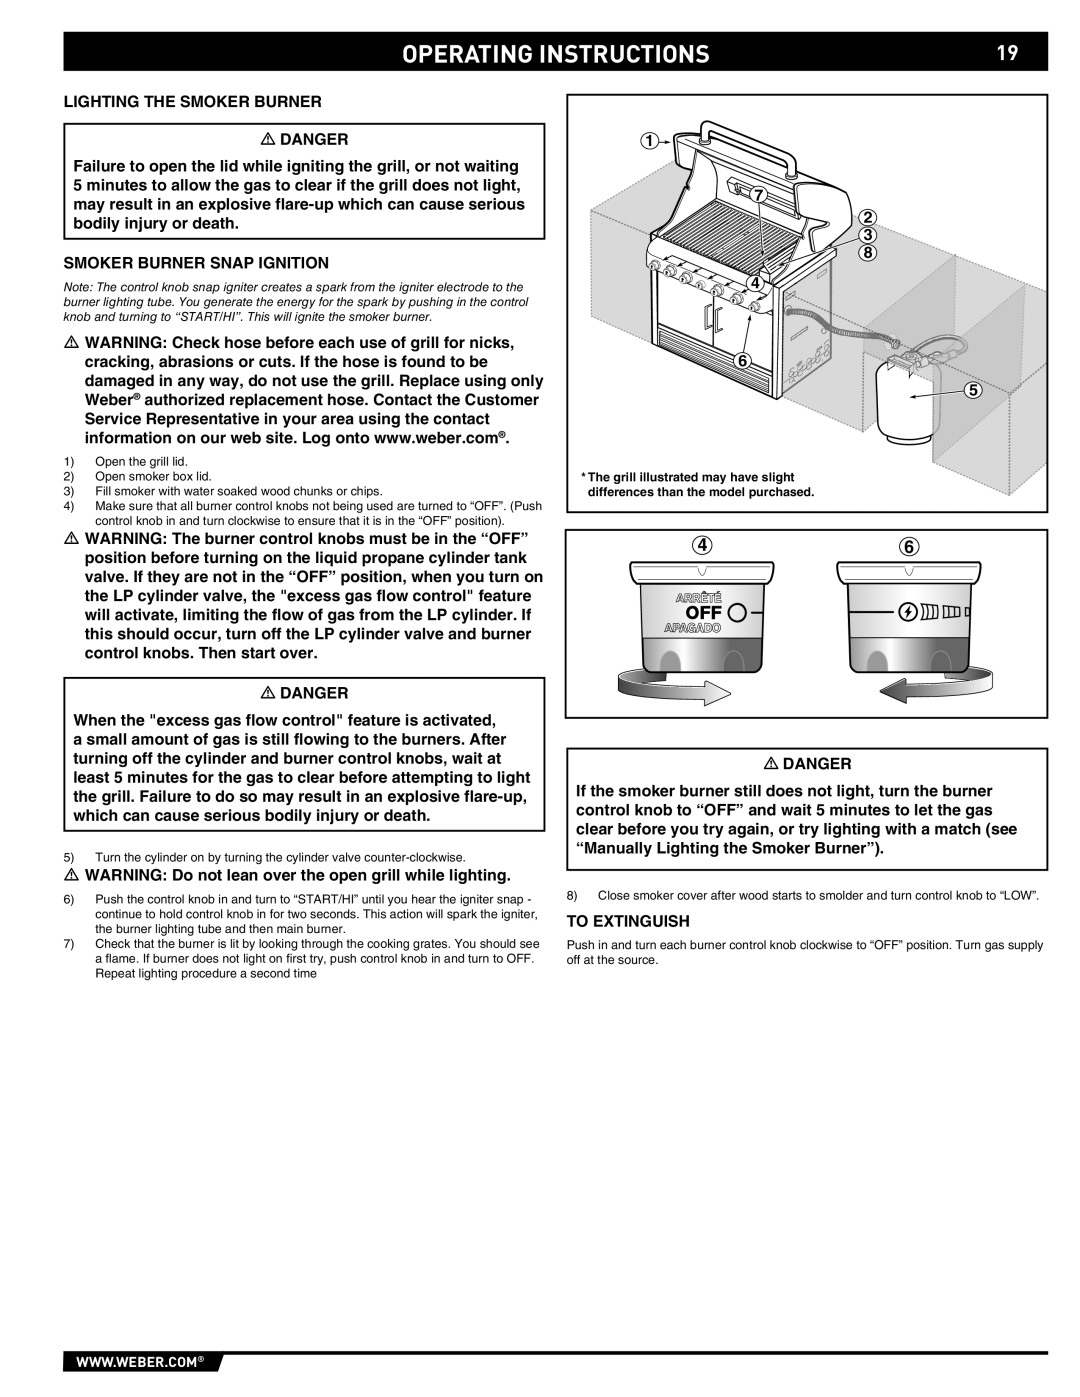 Weber S-460 manual Operating Instructions 